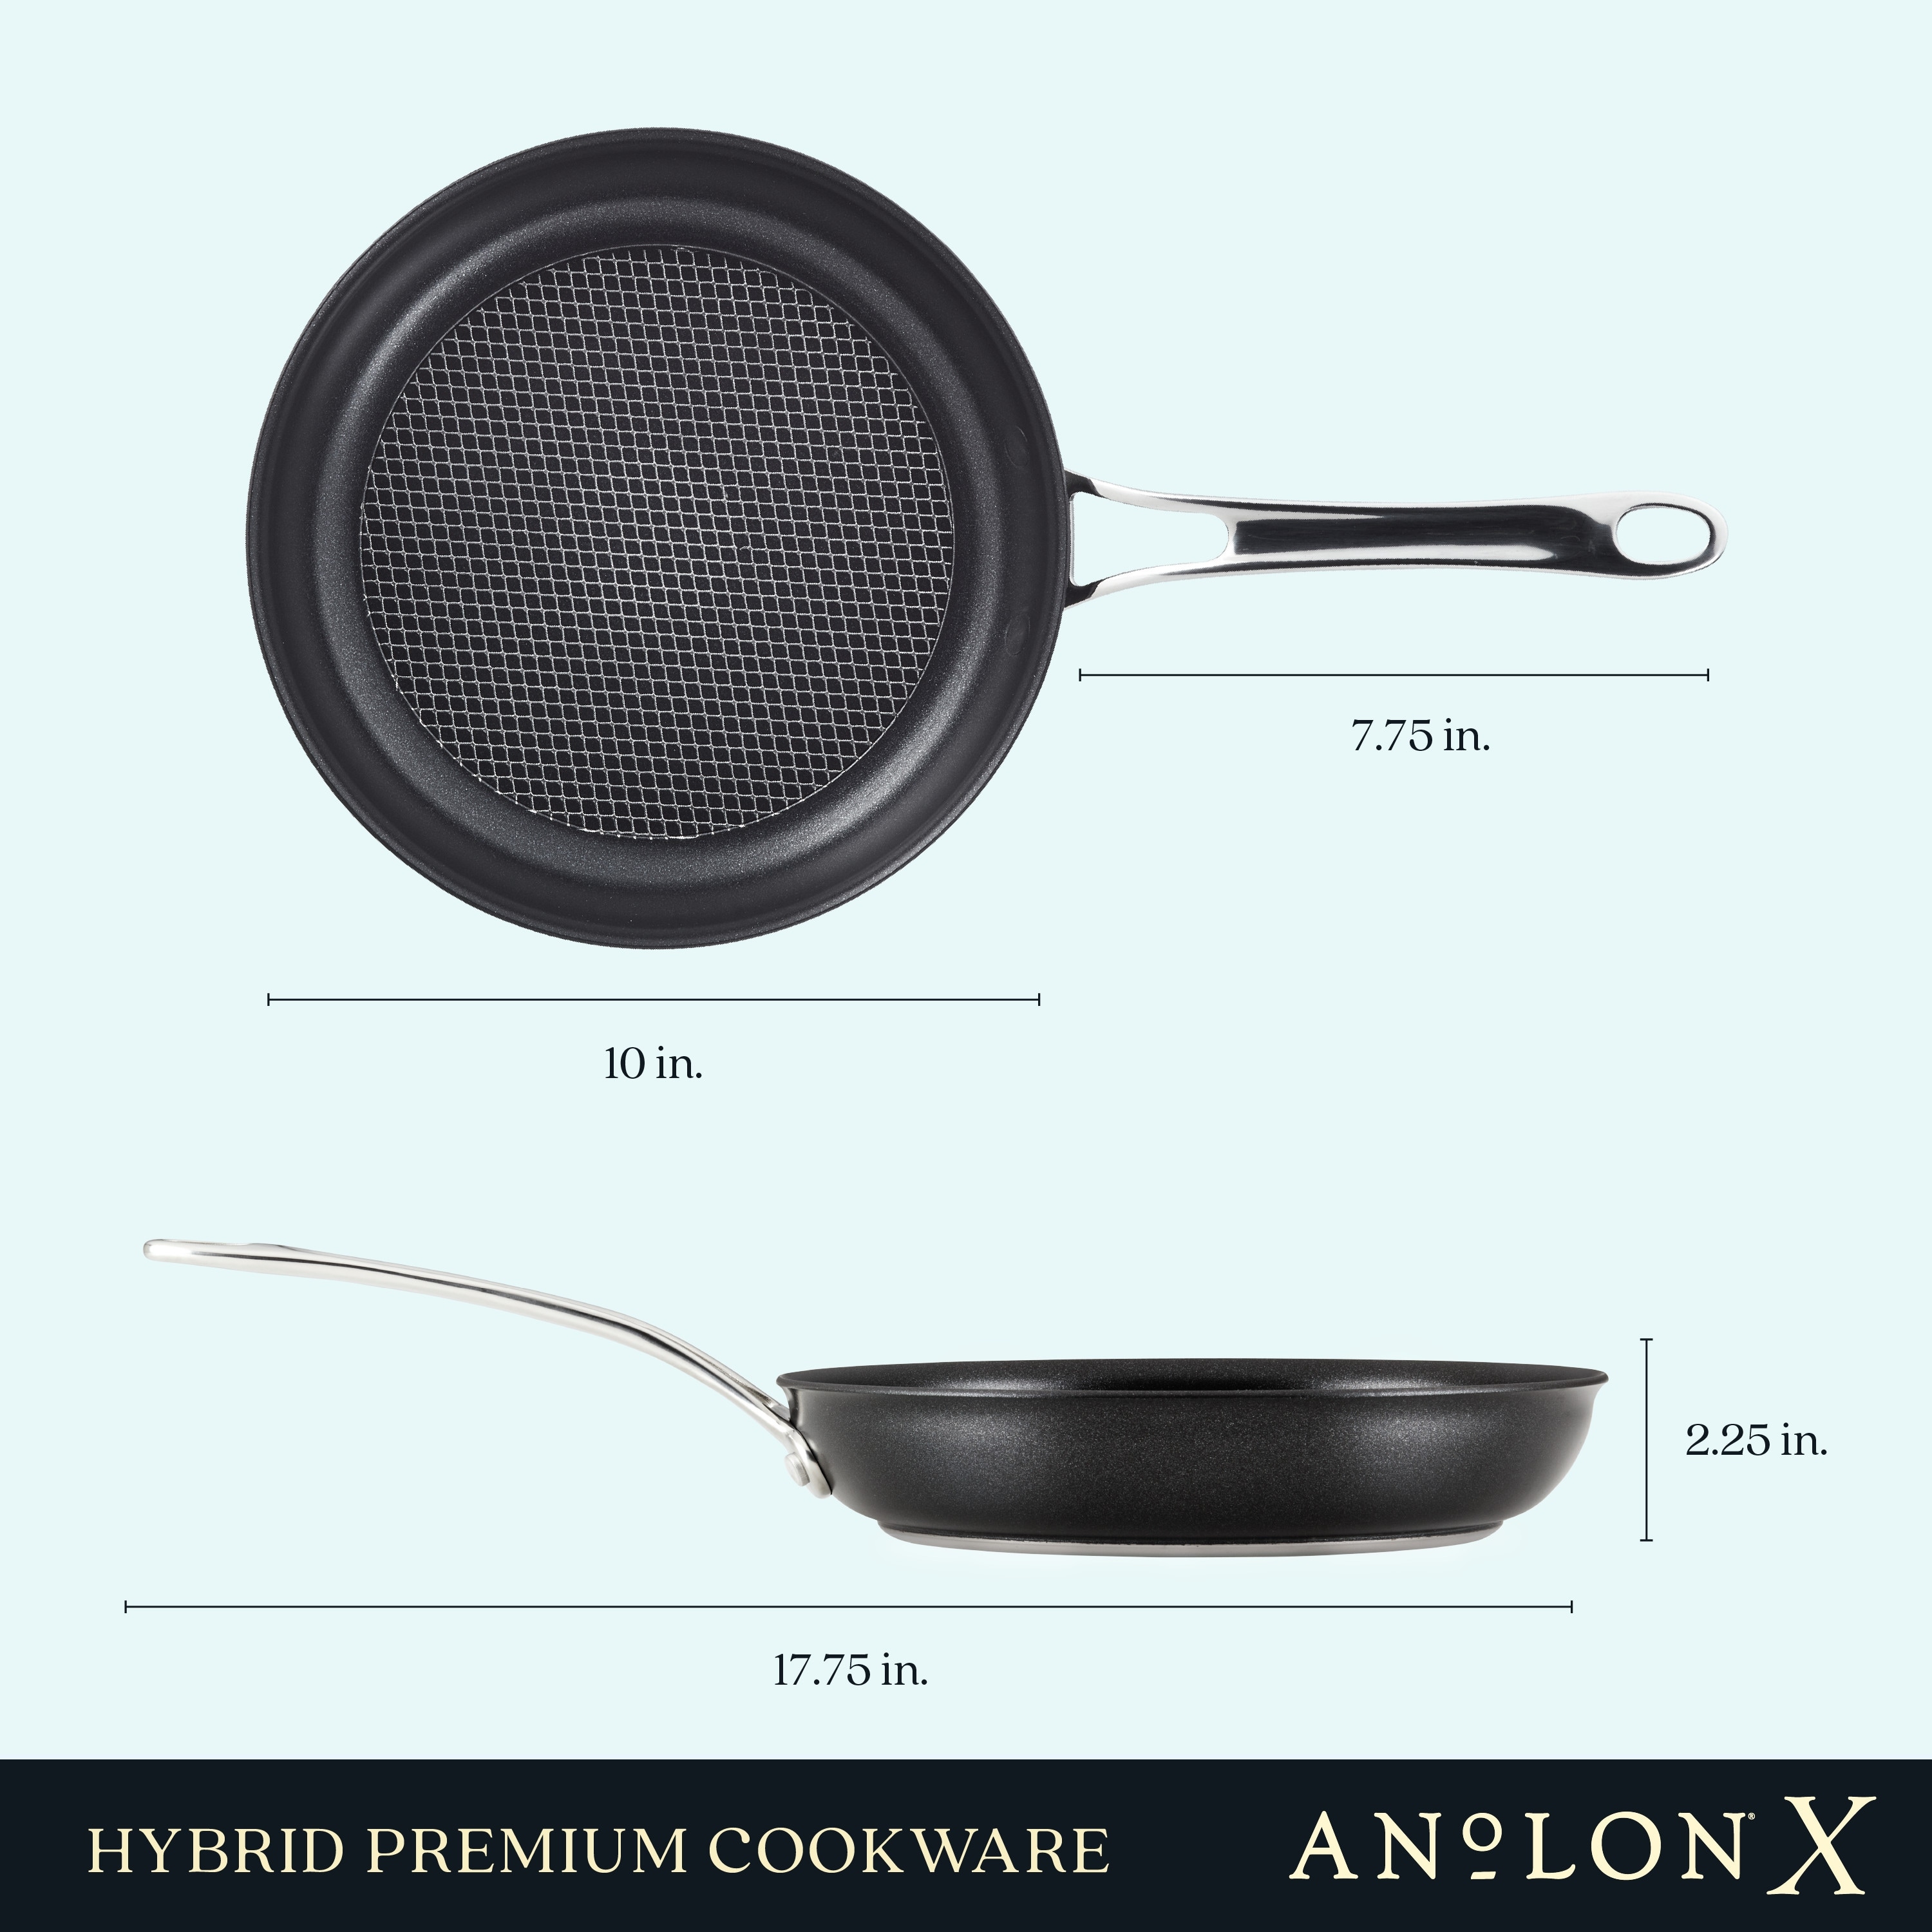 https://ak1.ostkcdn.com/images/products/is/images/direct/d304a0fe0c3879b9916b2ce9925105008b5a38d6/Anolon-X-Hybrid-Nonstick-Induction-Frying-Pan%2C-8.25-Inch%2C-Super-Dark-Gray.jpg